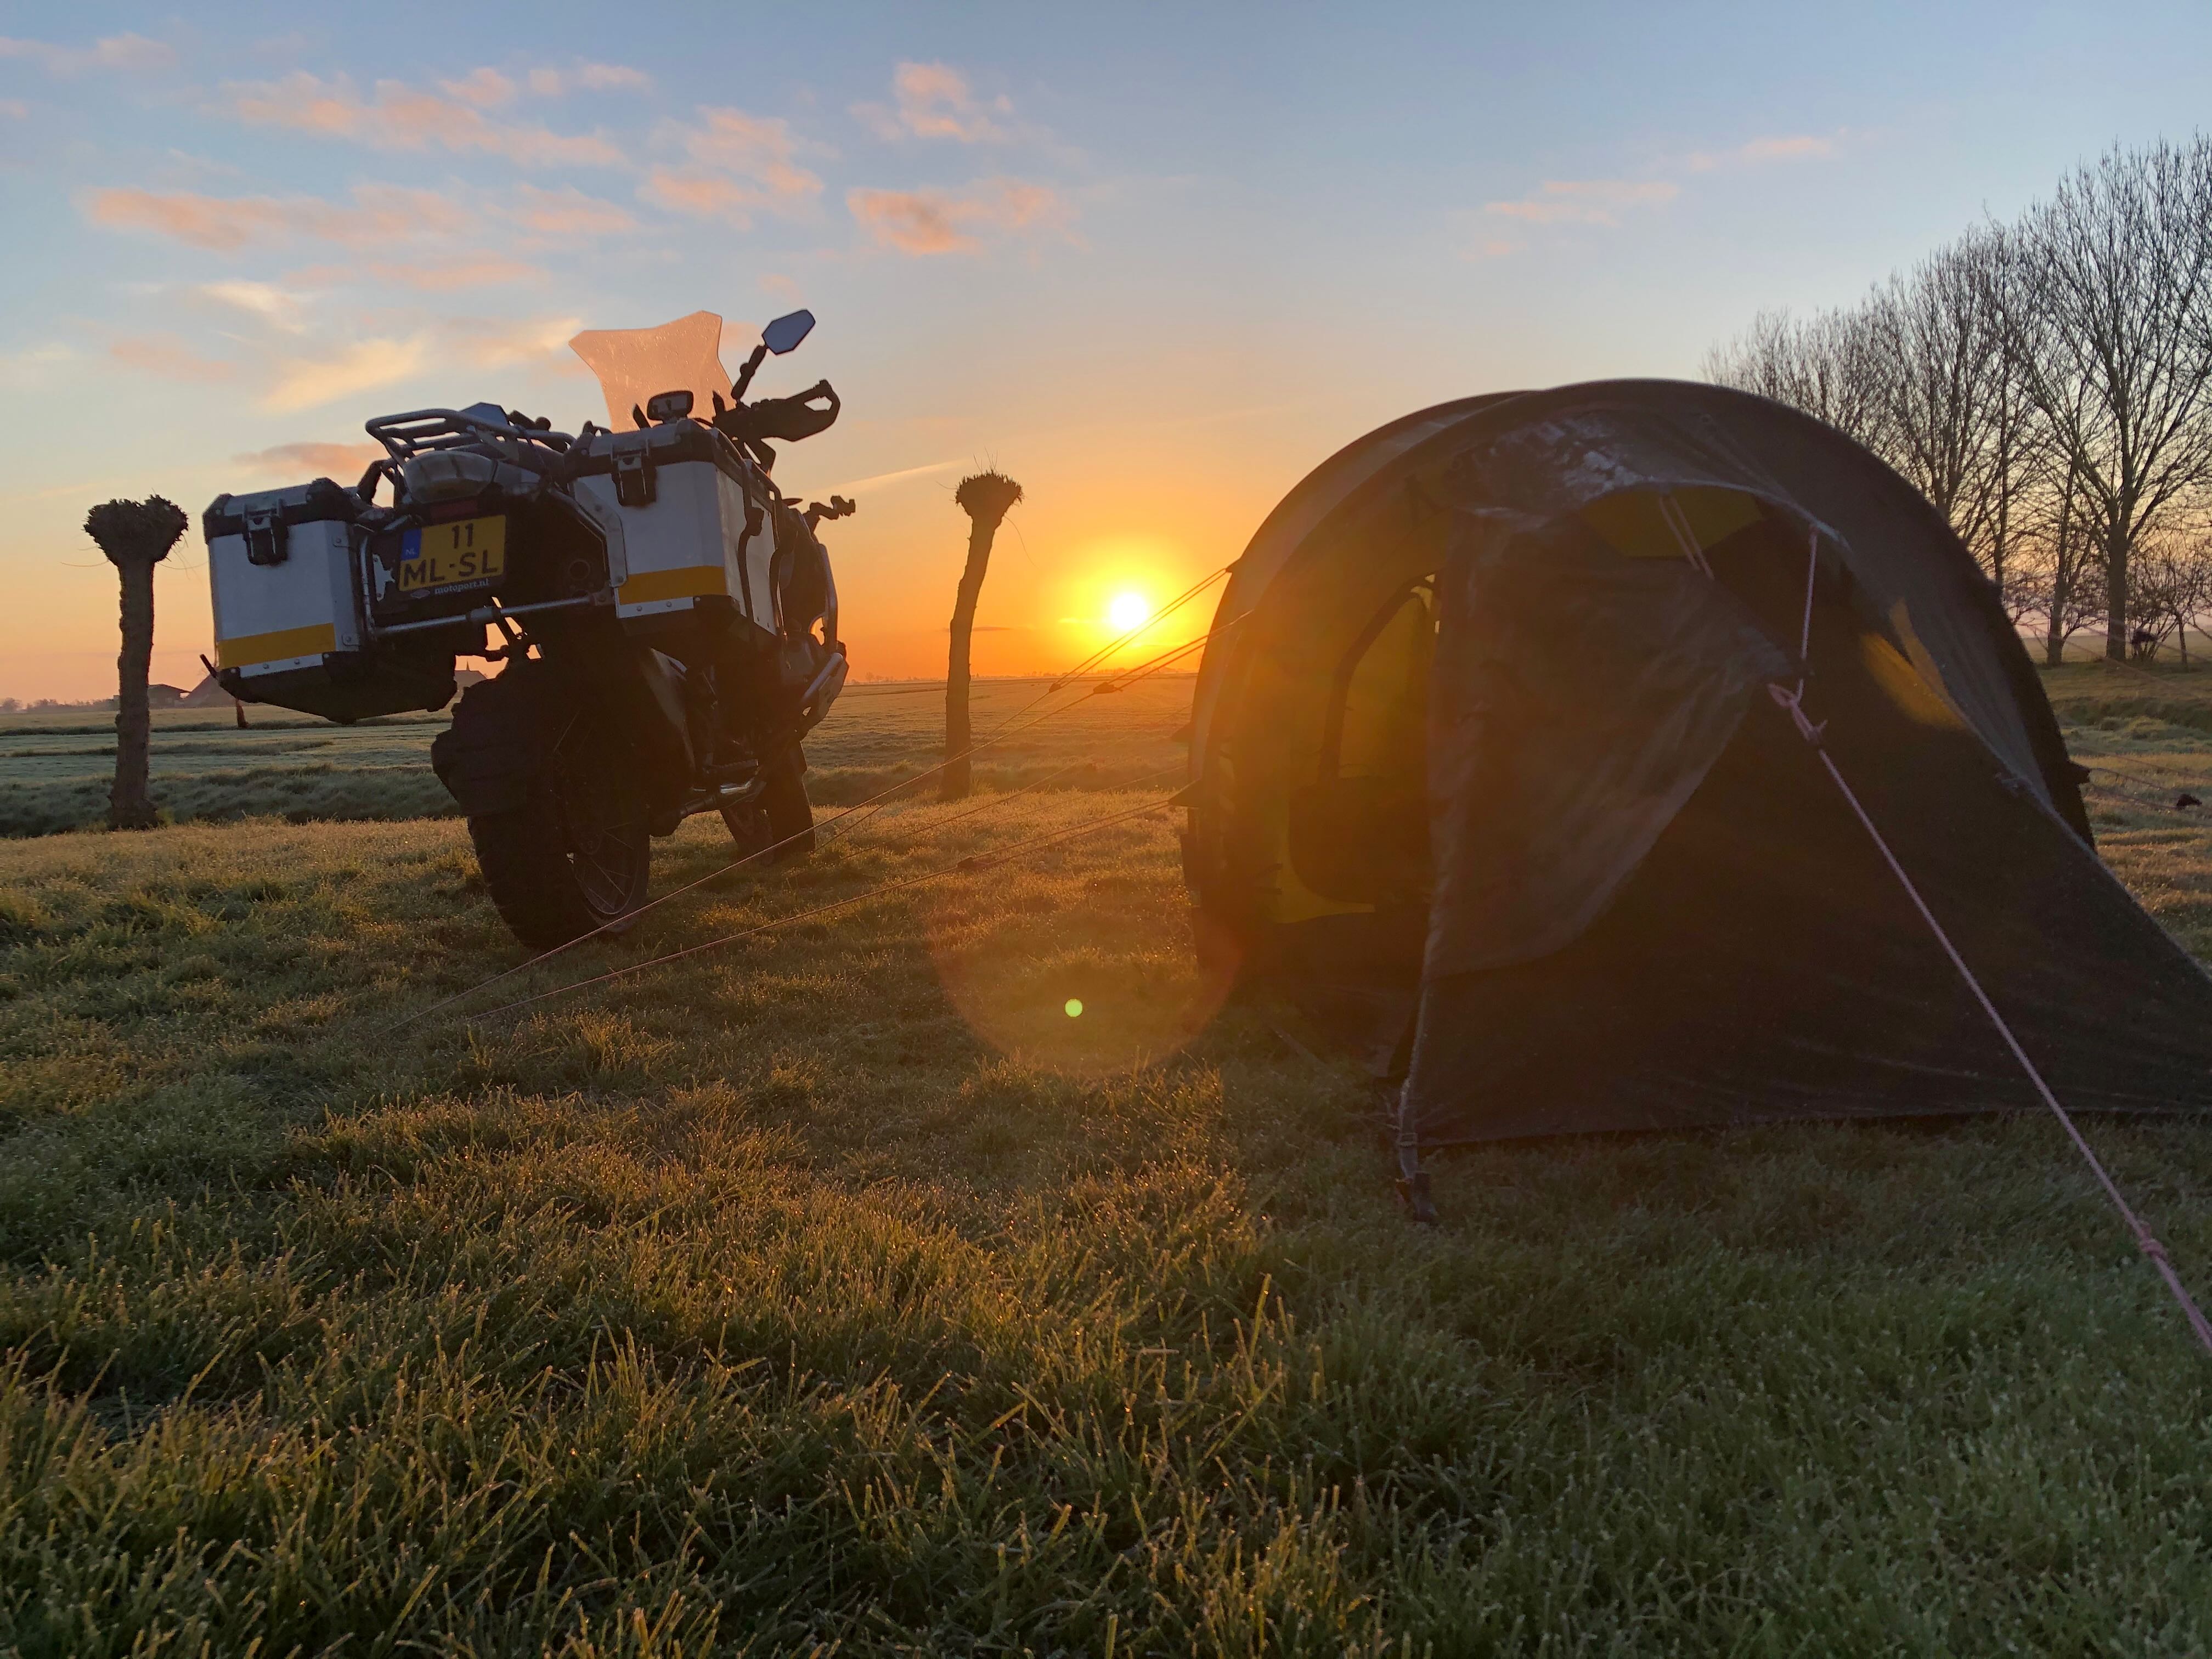 Herko's motorcycle and tent during sunrise